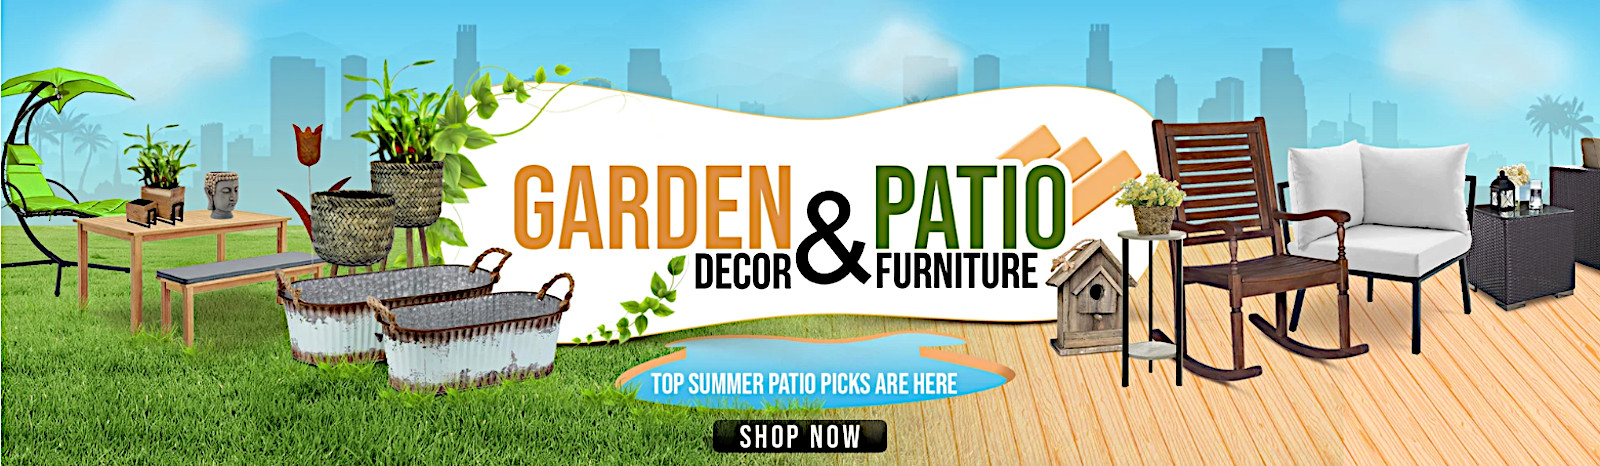 home decor furniture low-priced